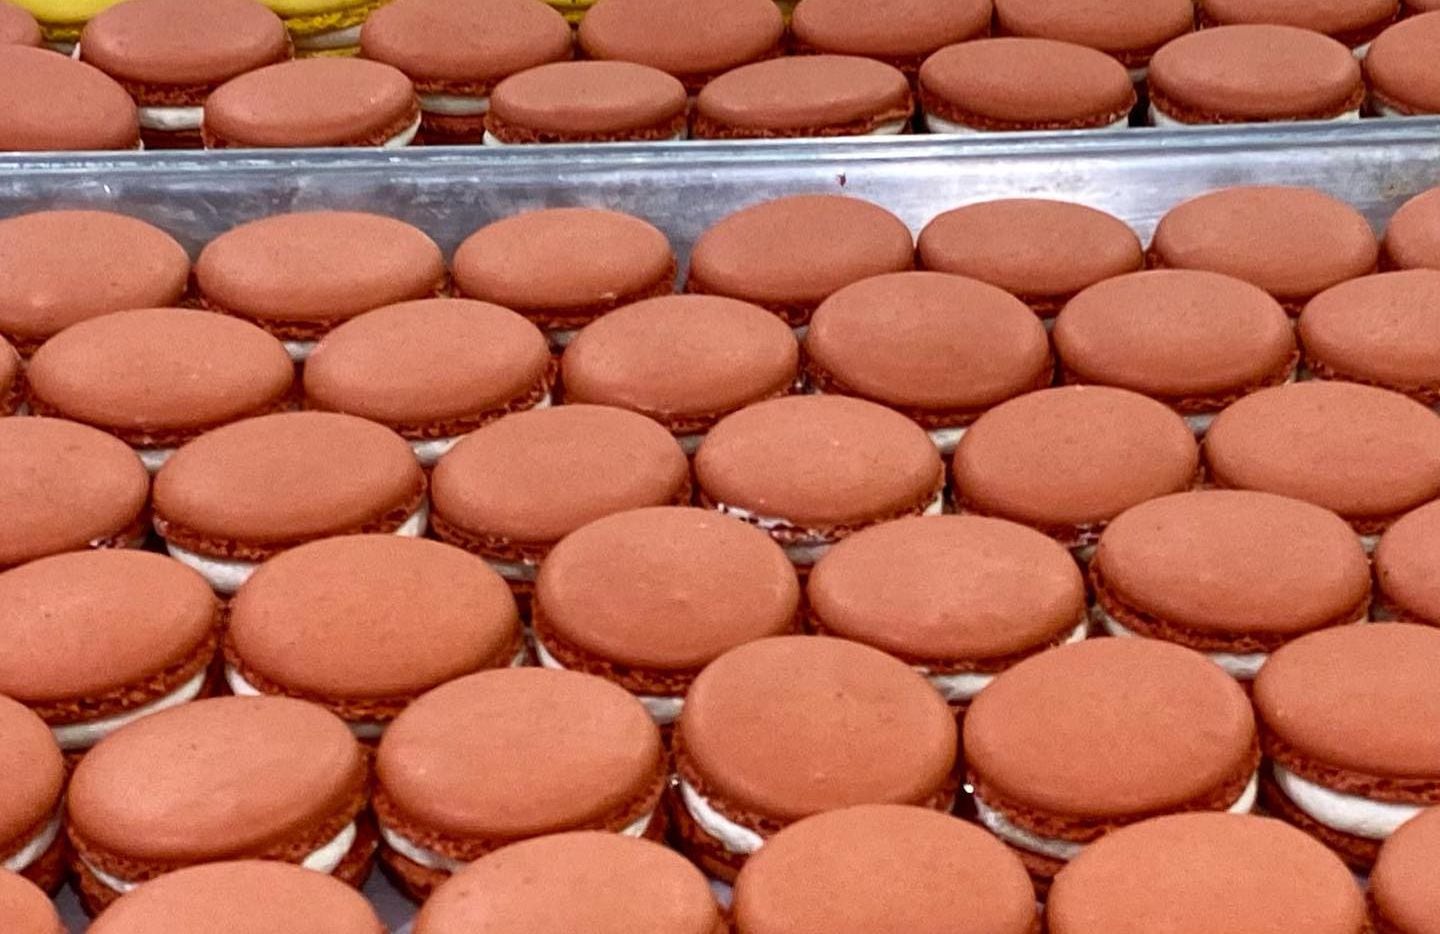 Macarons and other pastries are coming to Ollio Foods bakery in The Colony next month.